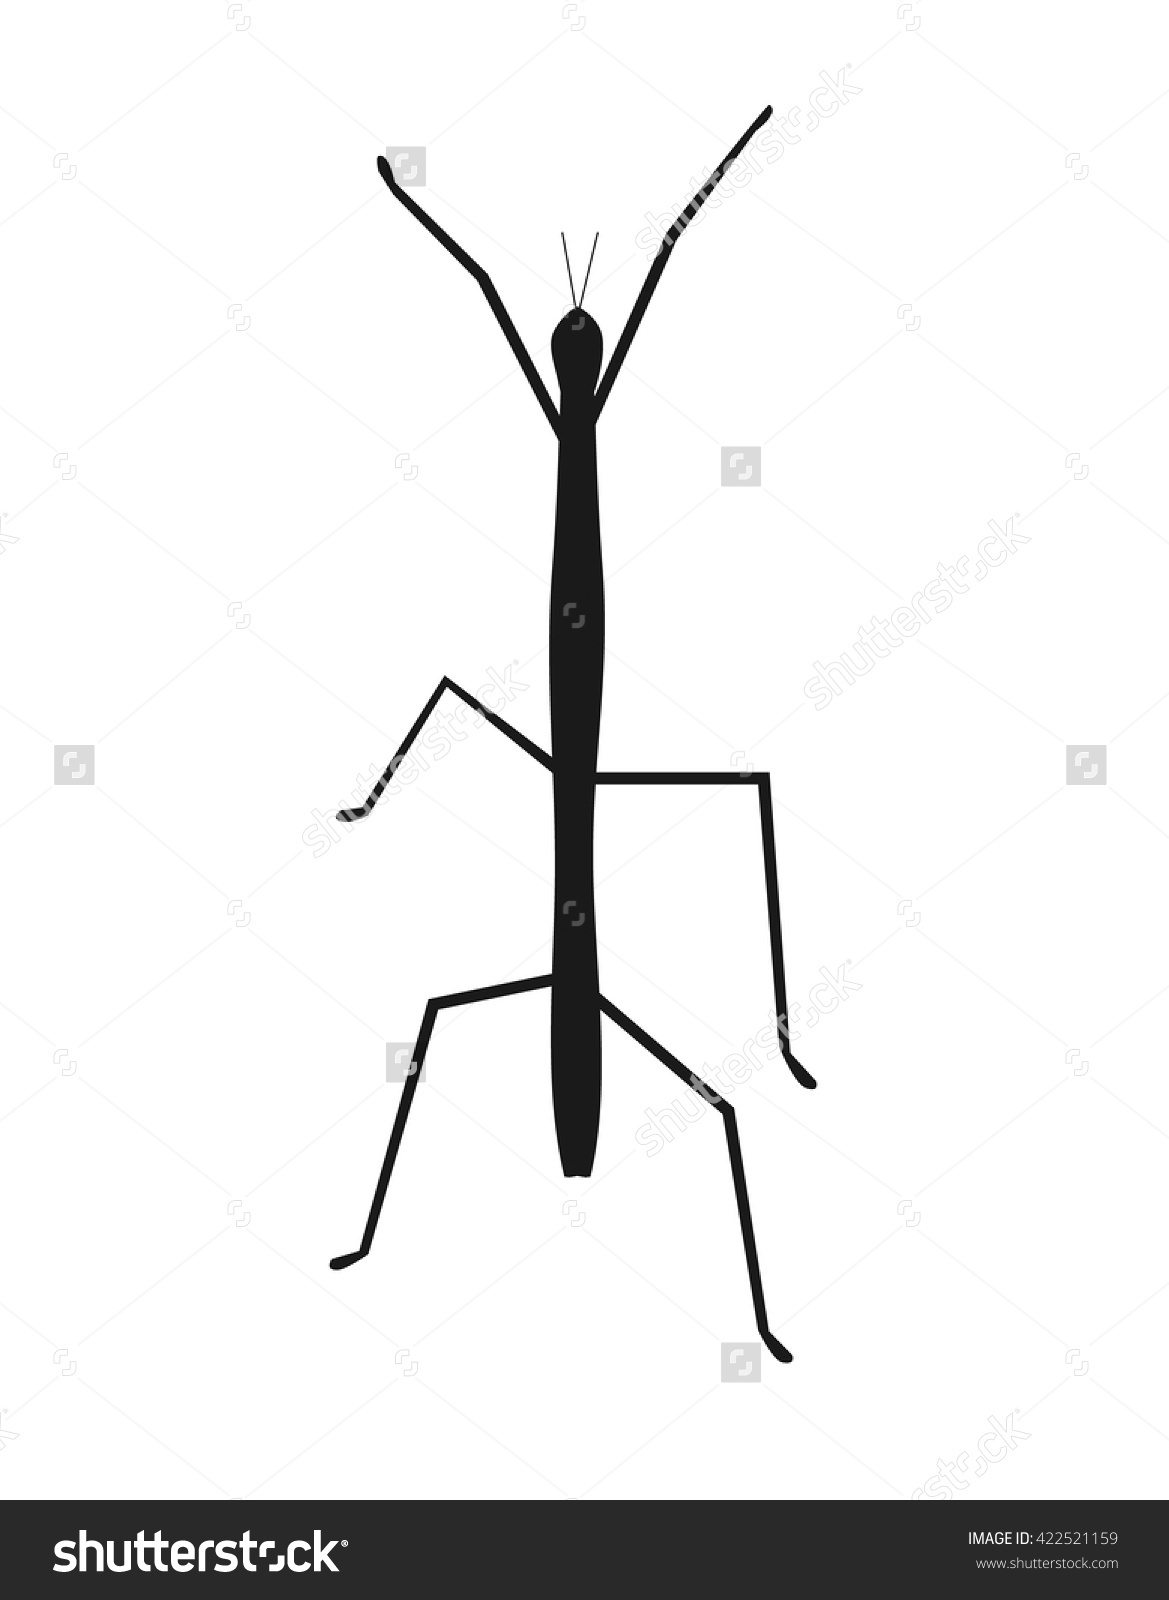 Stick Insect Phasmids Ghost Insects Walking Stock Vector 422521159.